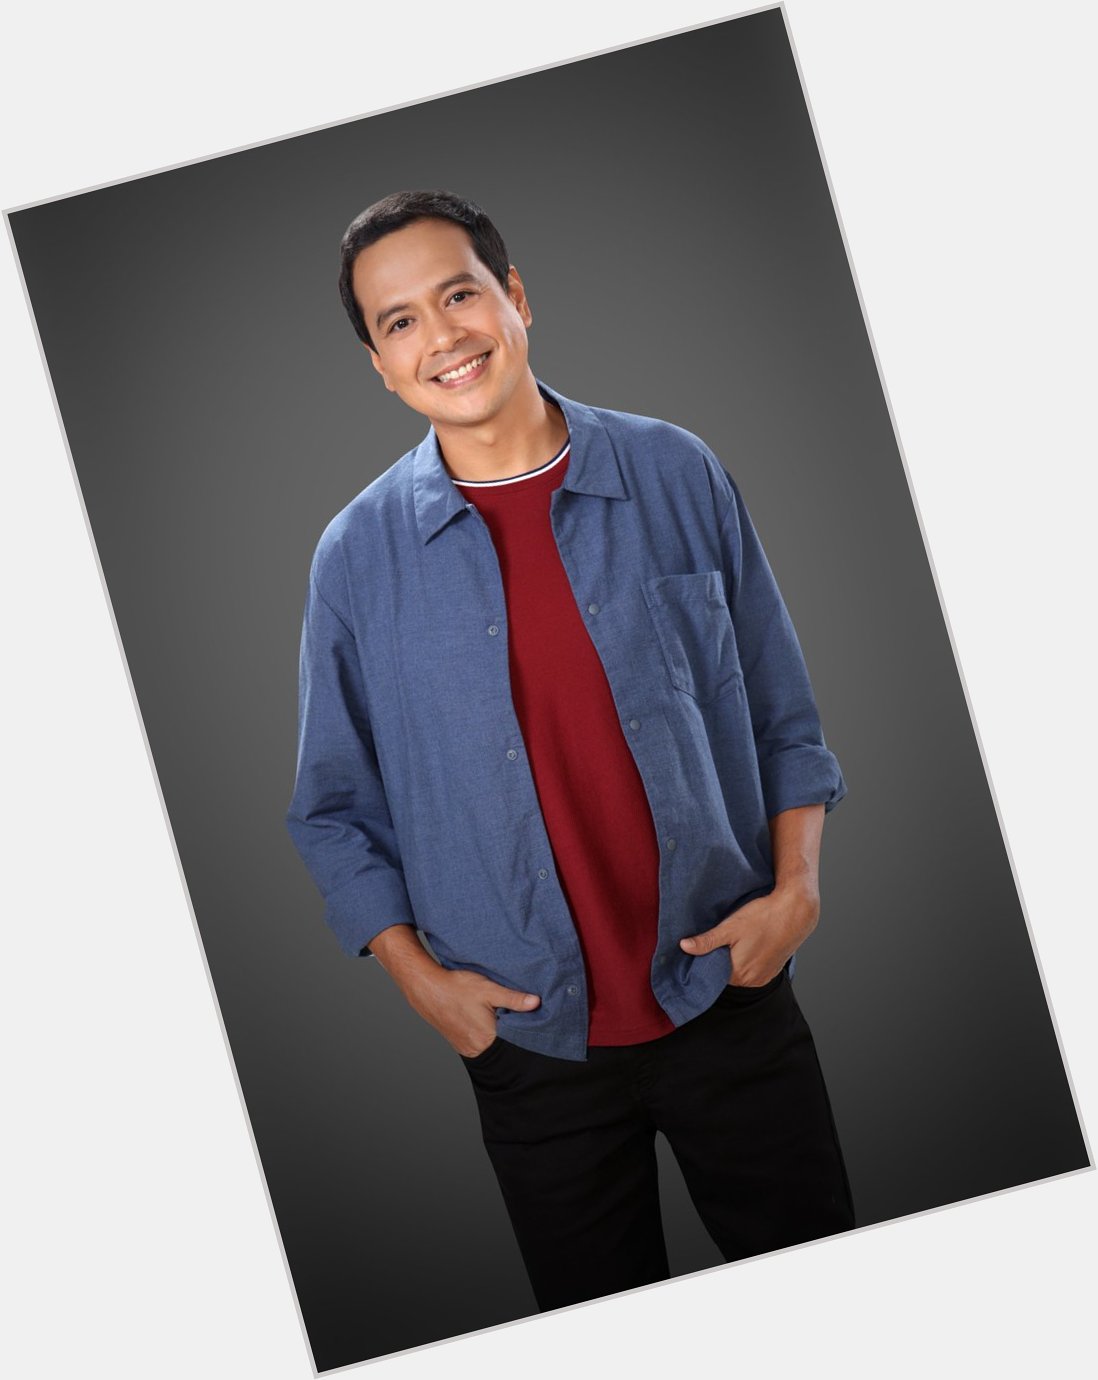 Happy birthday, John Lloyd Cruz! May your special day be filled with lots of smiles and love,   